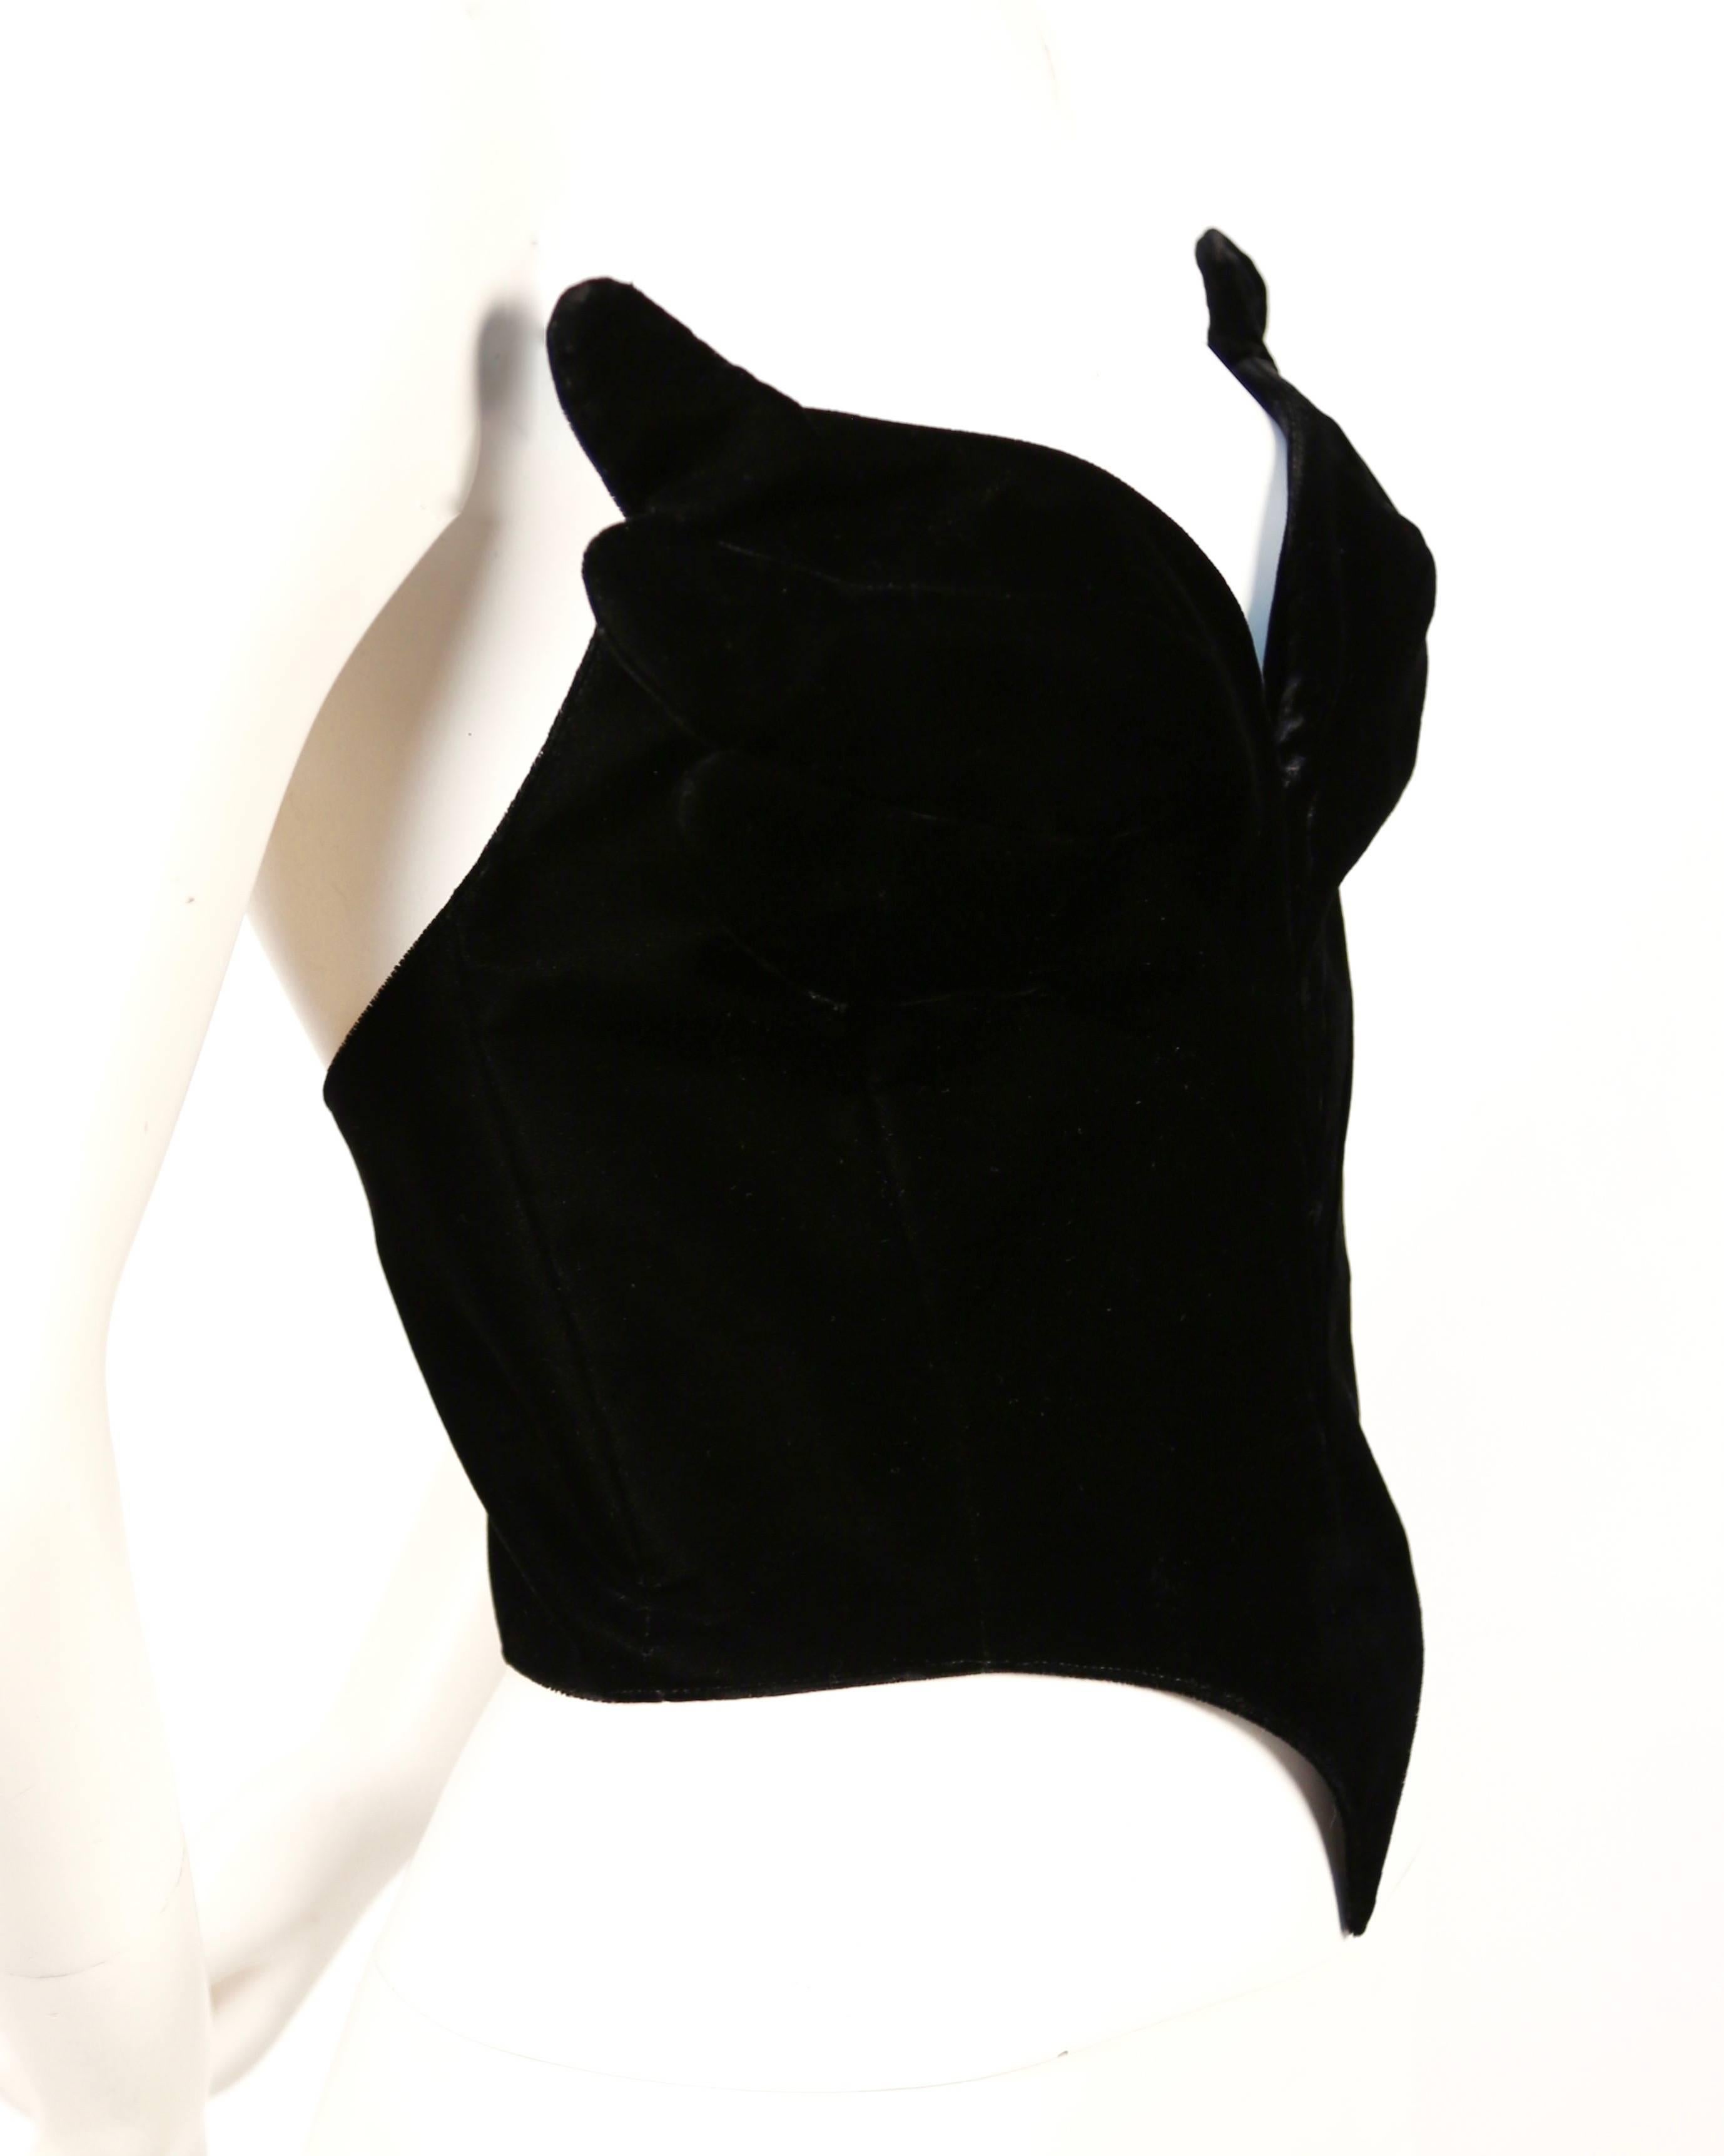 Very rare jet black velvet winged bustier designed by Thierry Mugler dating to 1988. Labeled a French size 38. Bustier measures approximately 33